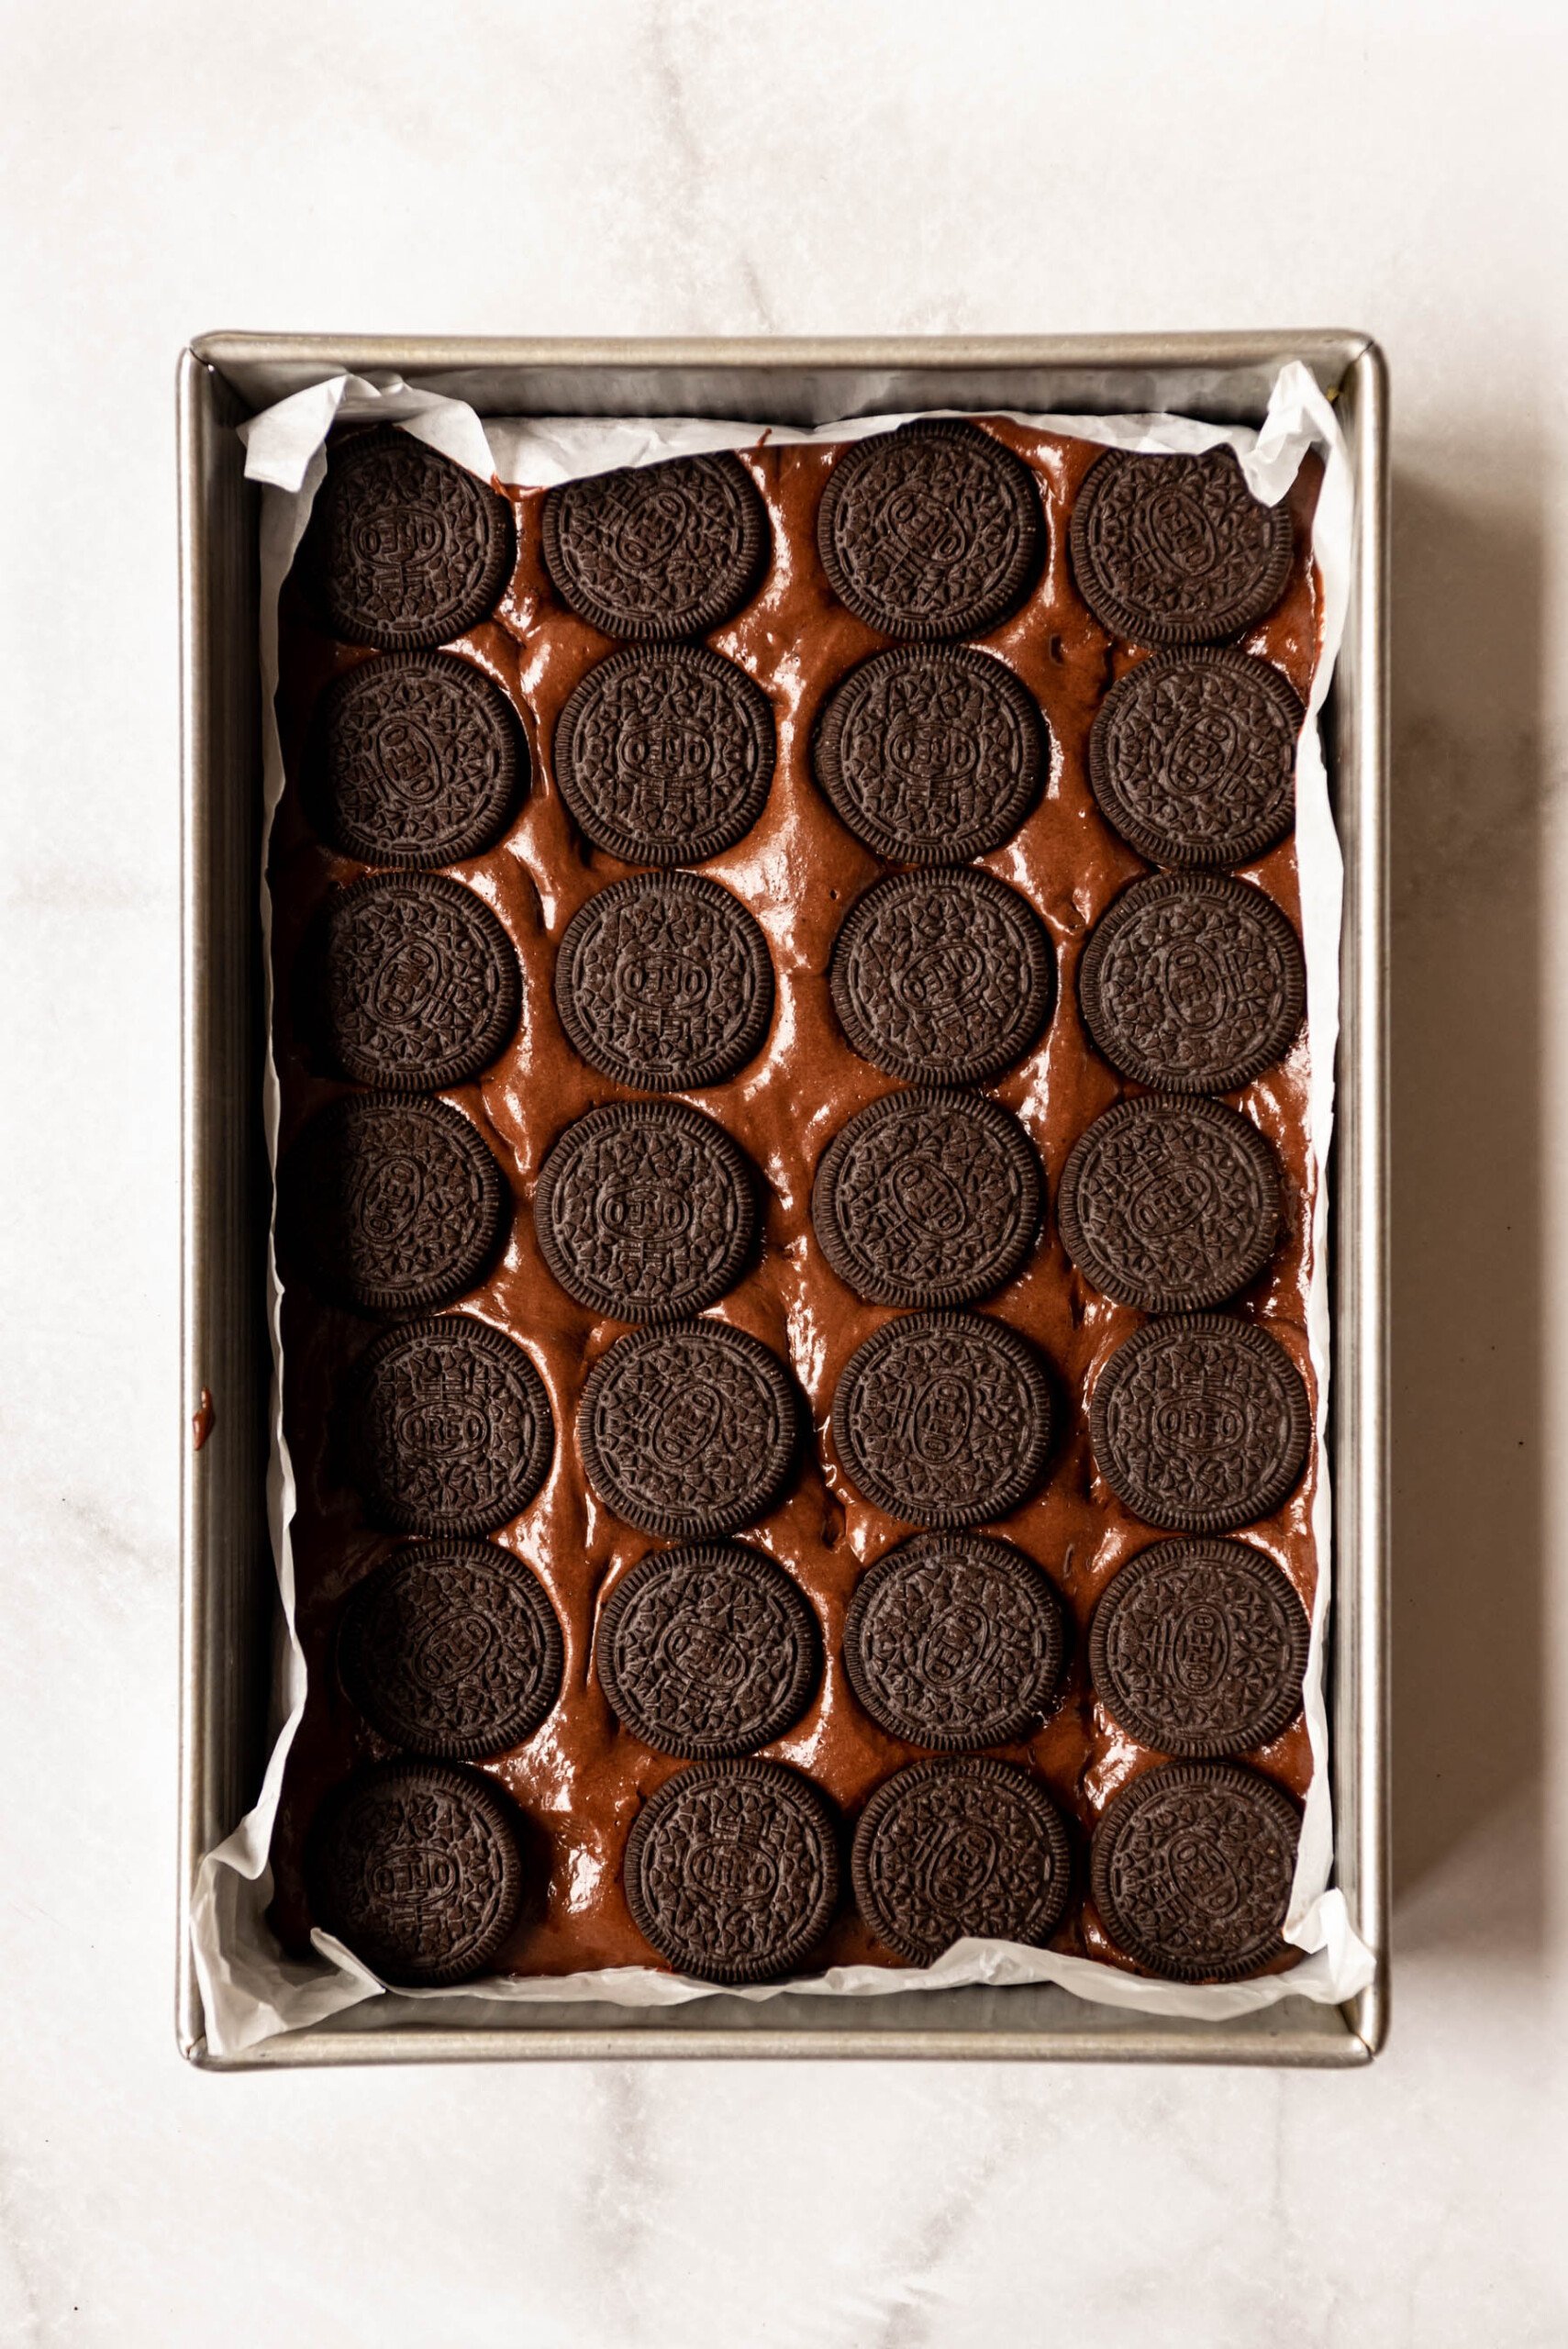 Adding rows of Oreos to a baking dish filled with brownie batter.